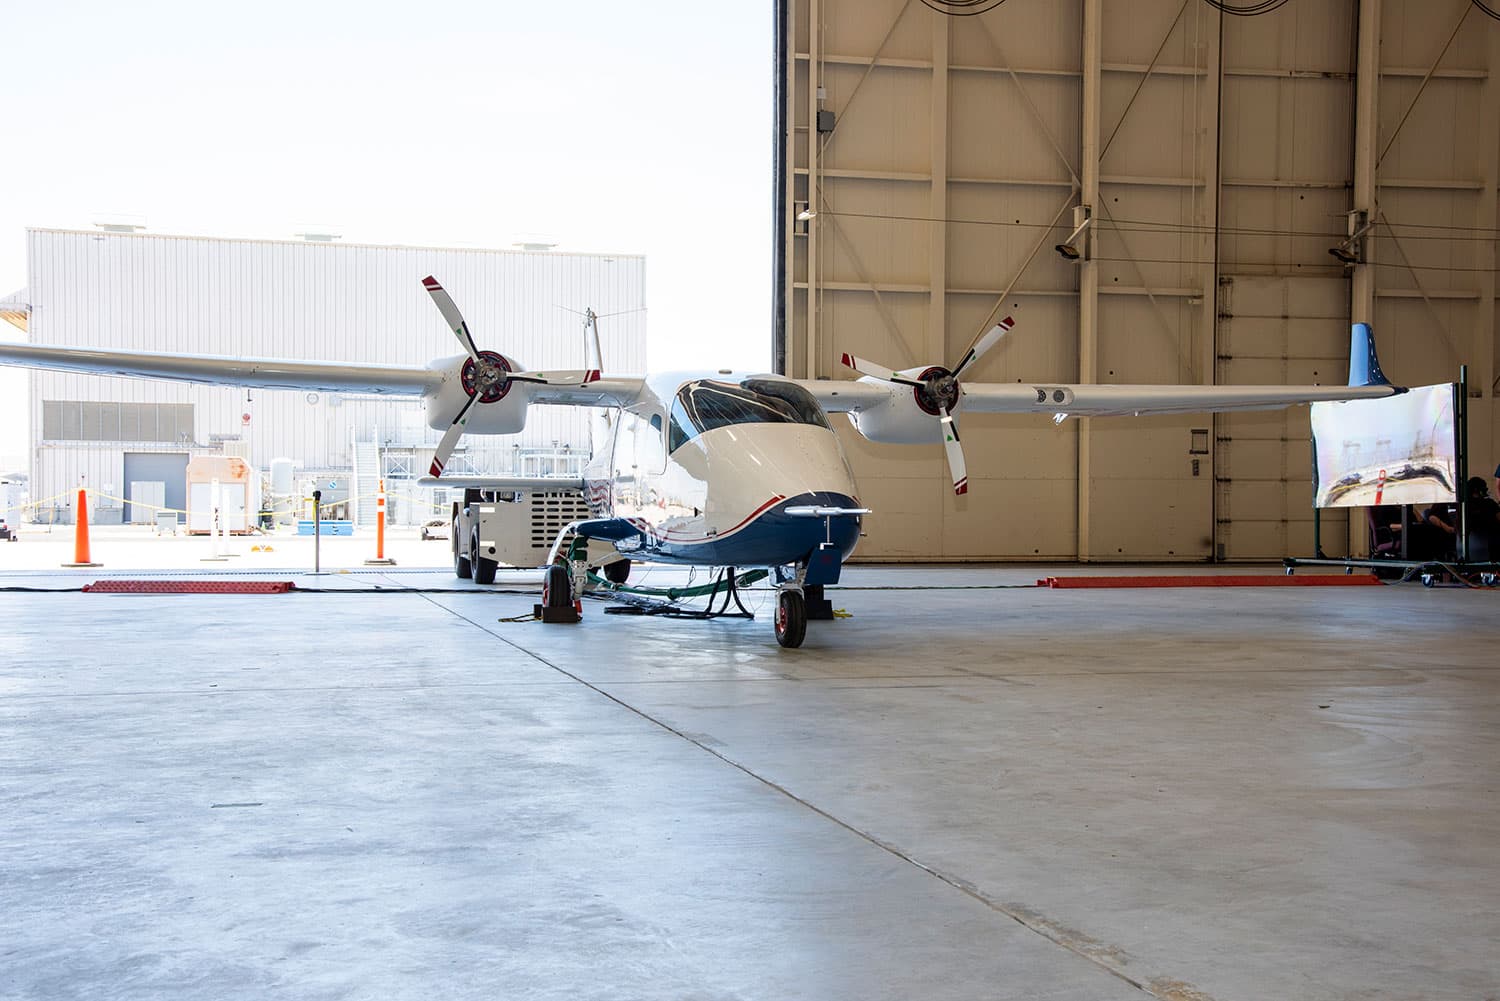 NASA’s X-57 all-electric aircraft in the Mod II configuration undergoes high-voltage testing in 2021.